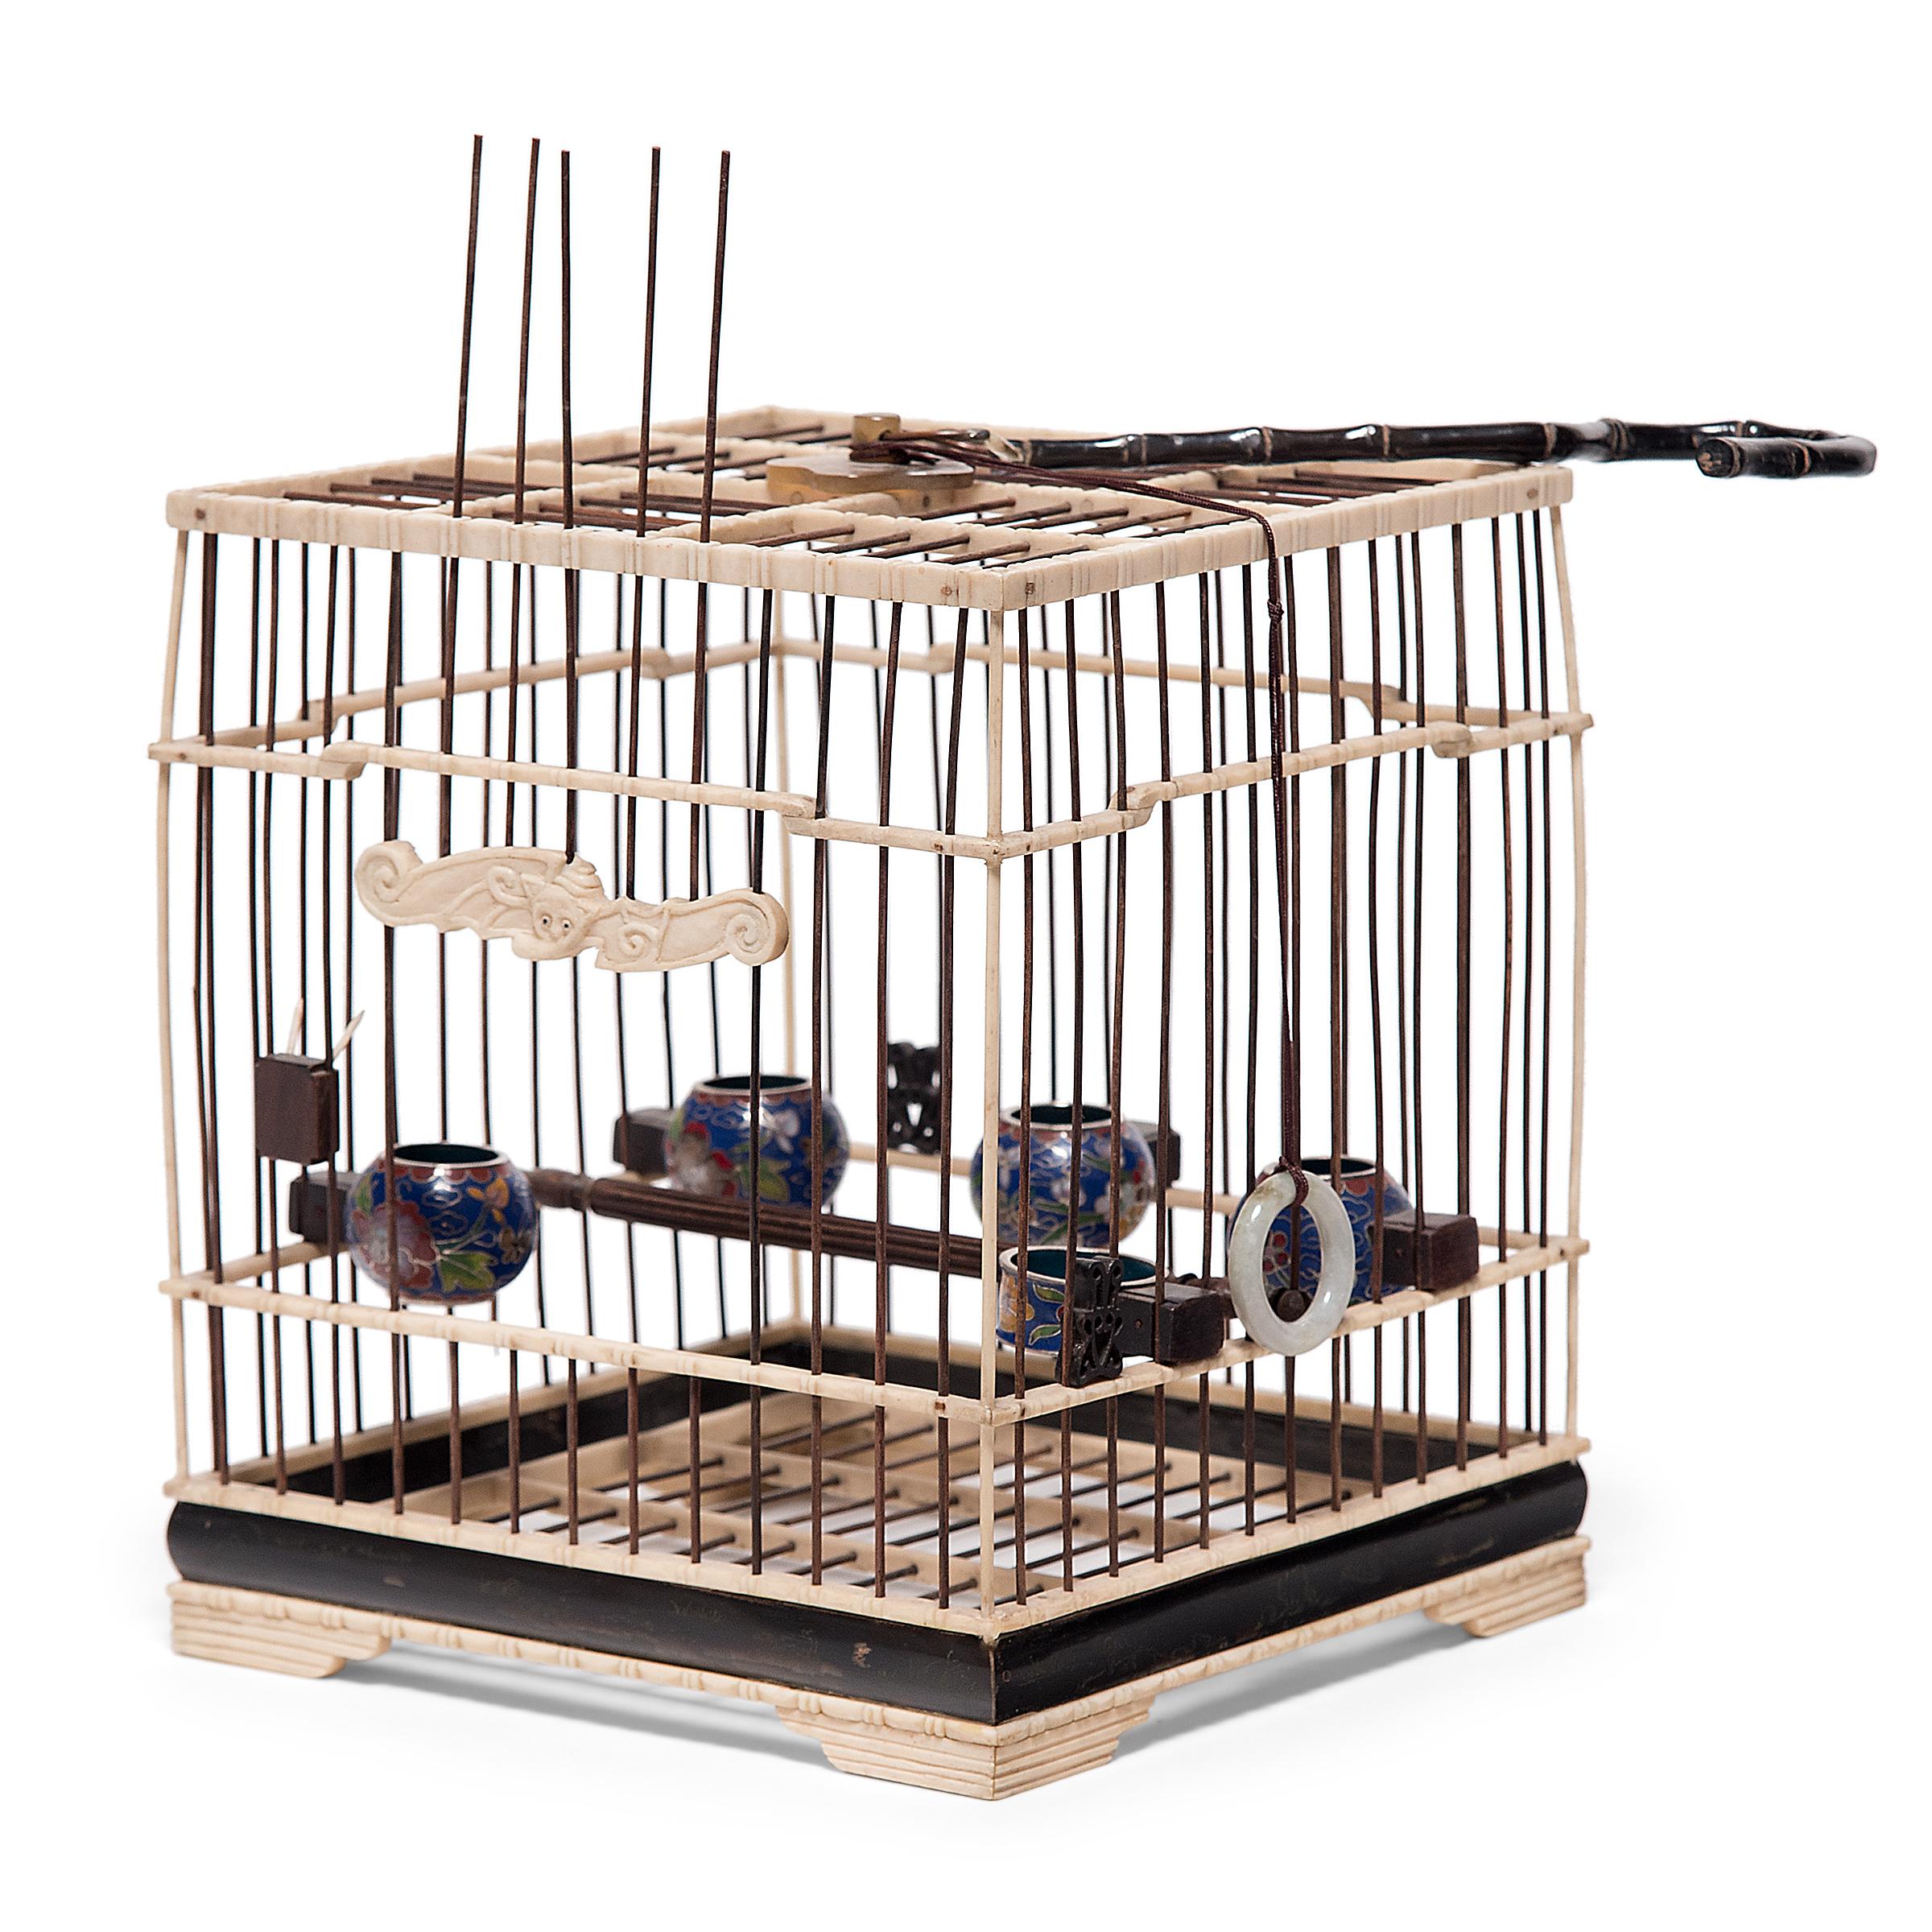 Perfectly proportioned and delightfully ornate, this fine birdcage was once home to the pet of a Qing-dynasty aristocrat. Dated to the mid-19th century, this square birdcage is carefully assembled of thin wooden rods anchored by a carved bone frame.